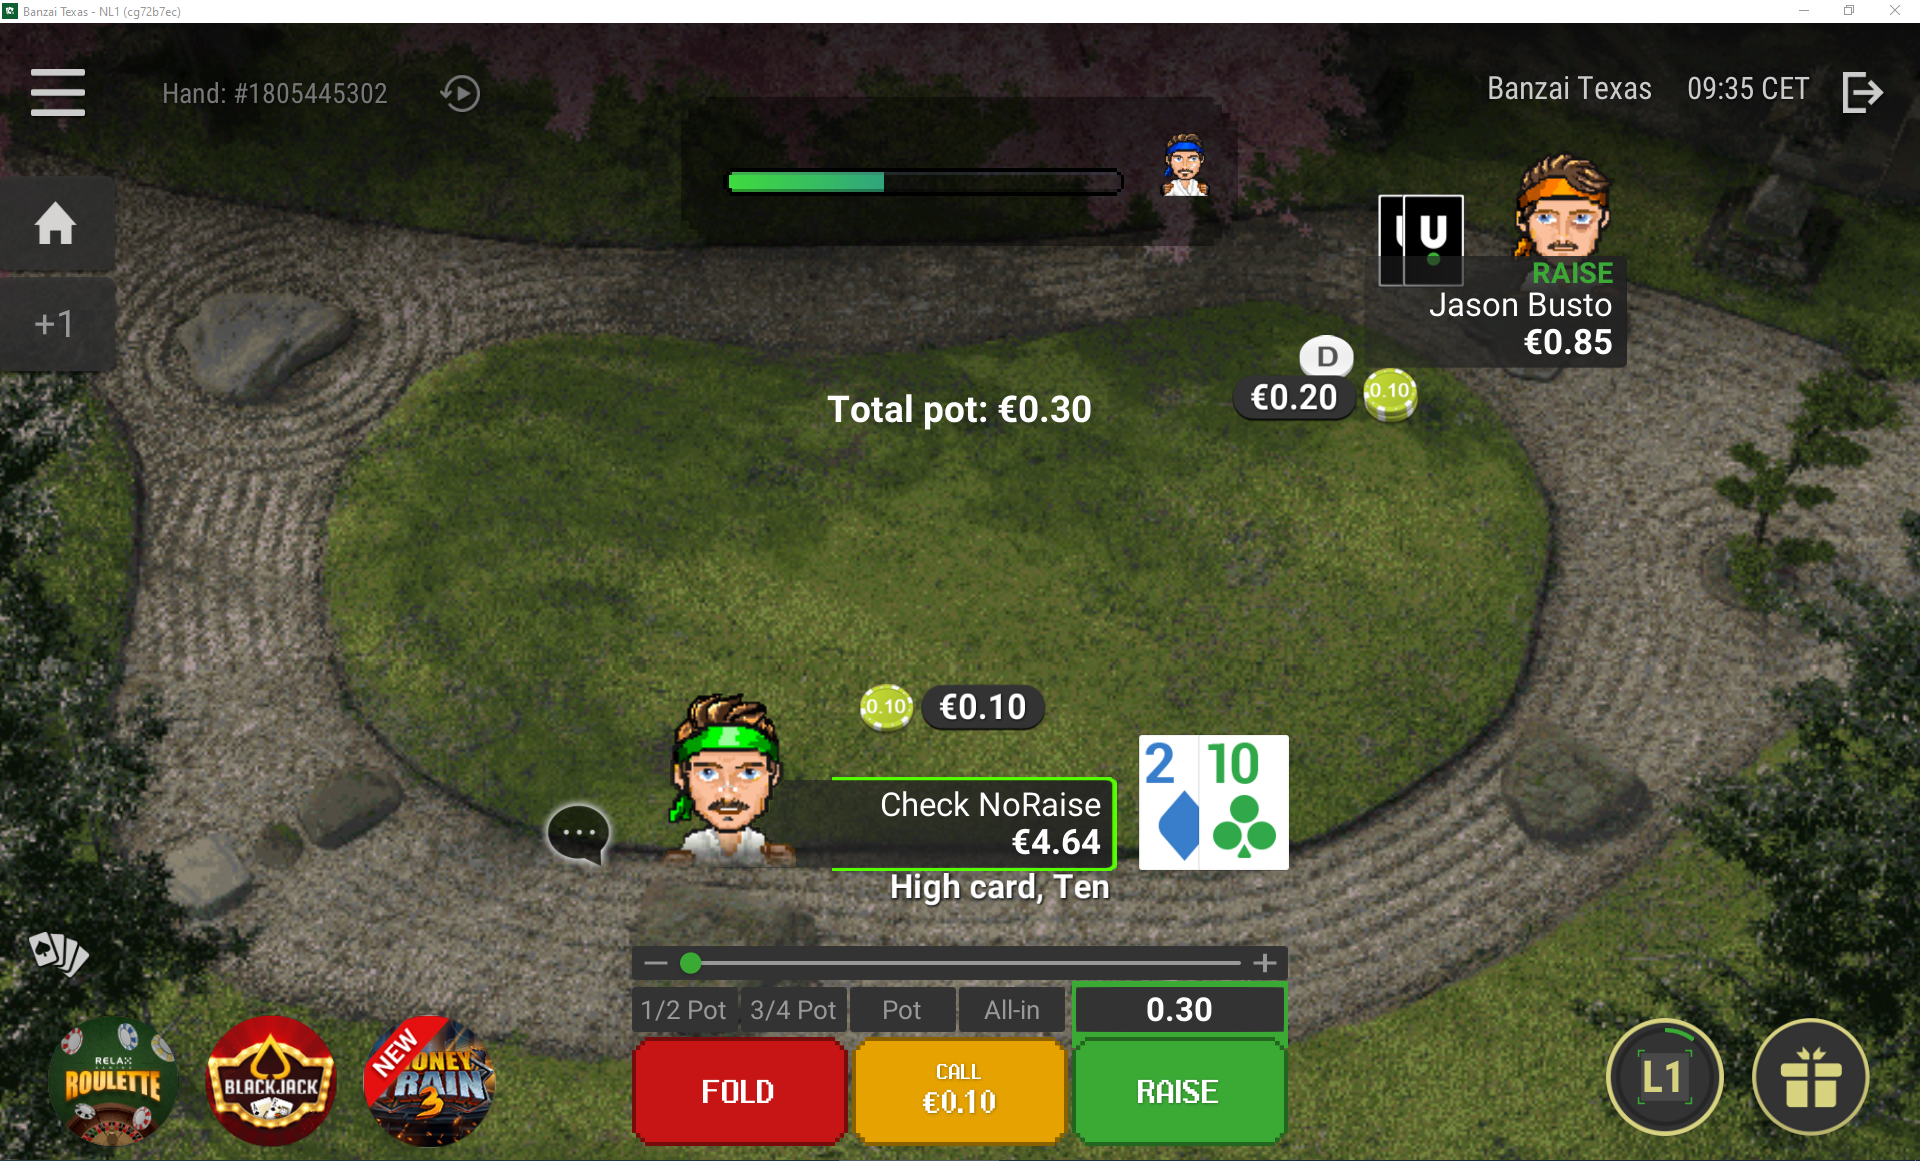 Won Flock Don't want News: The gamification of online poker